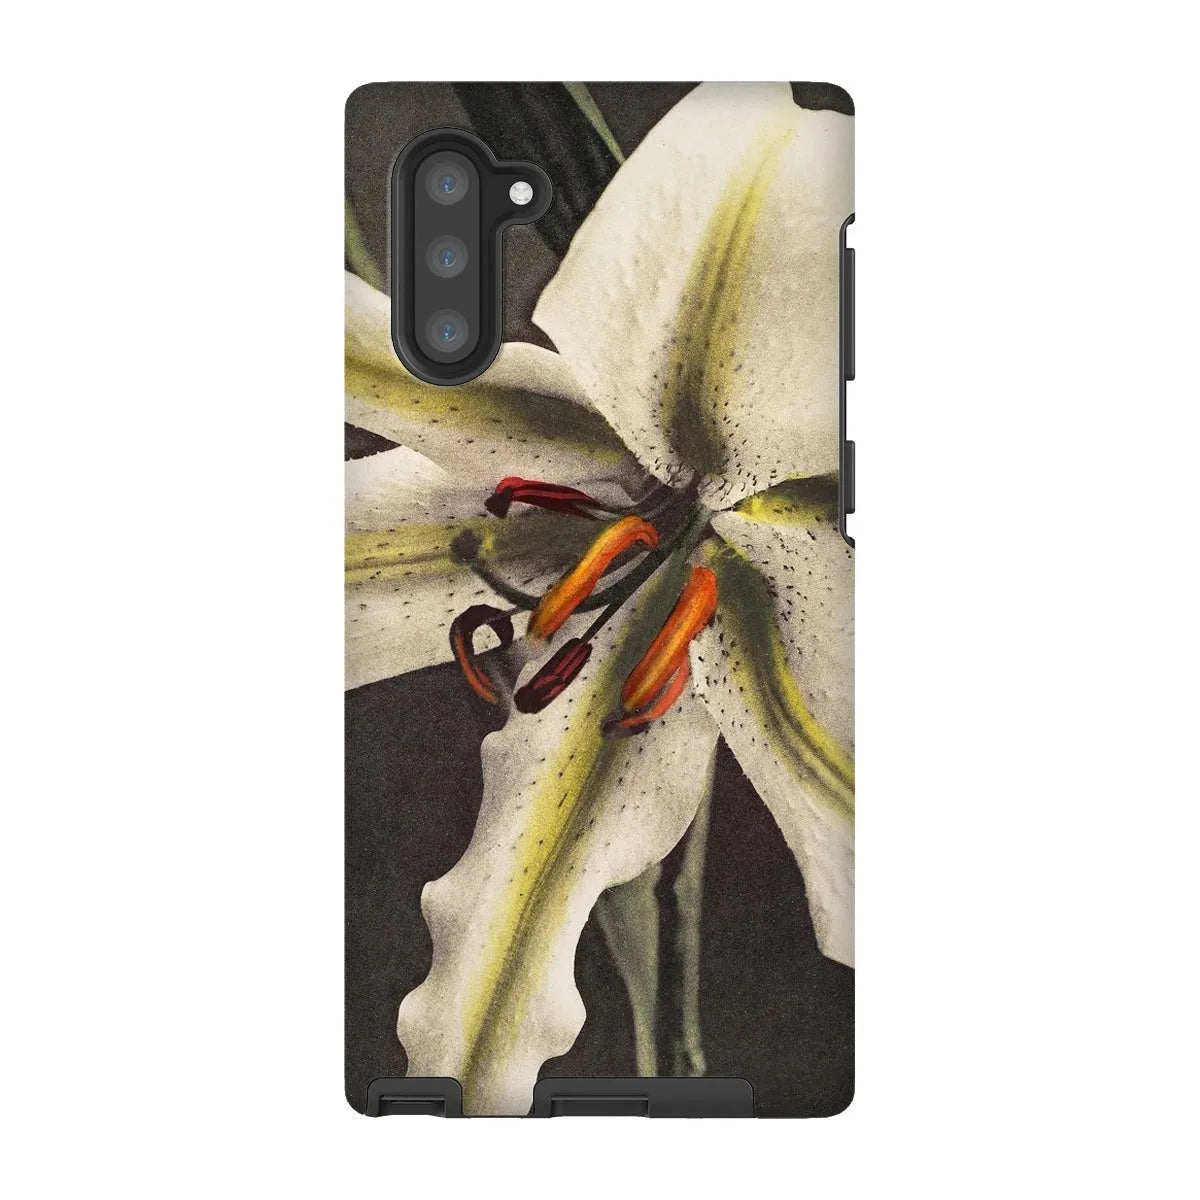 Lily By Kazumasa Ogawa Art Phone Case - Samsung Galaxy Note 10 / Matte - Mobile Phone Cases - Aesthetic Art